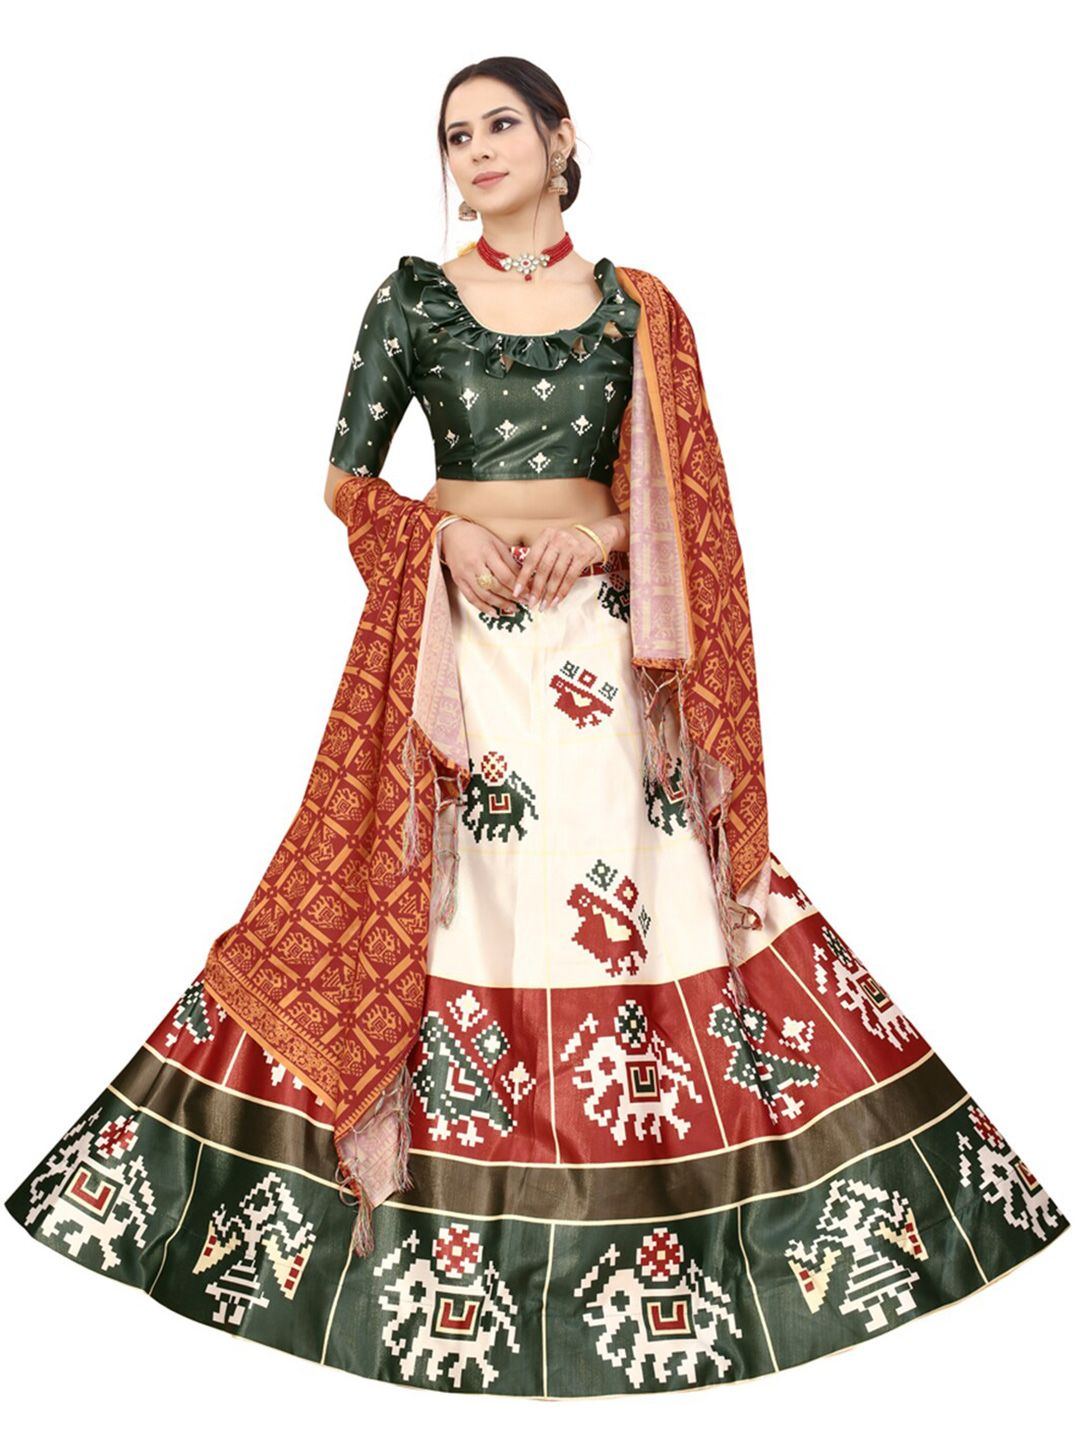 Xenilla White & Green Embroidered Semi-Stitched Lehenga & Blouse With Dupatta Price in India